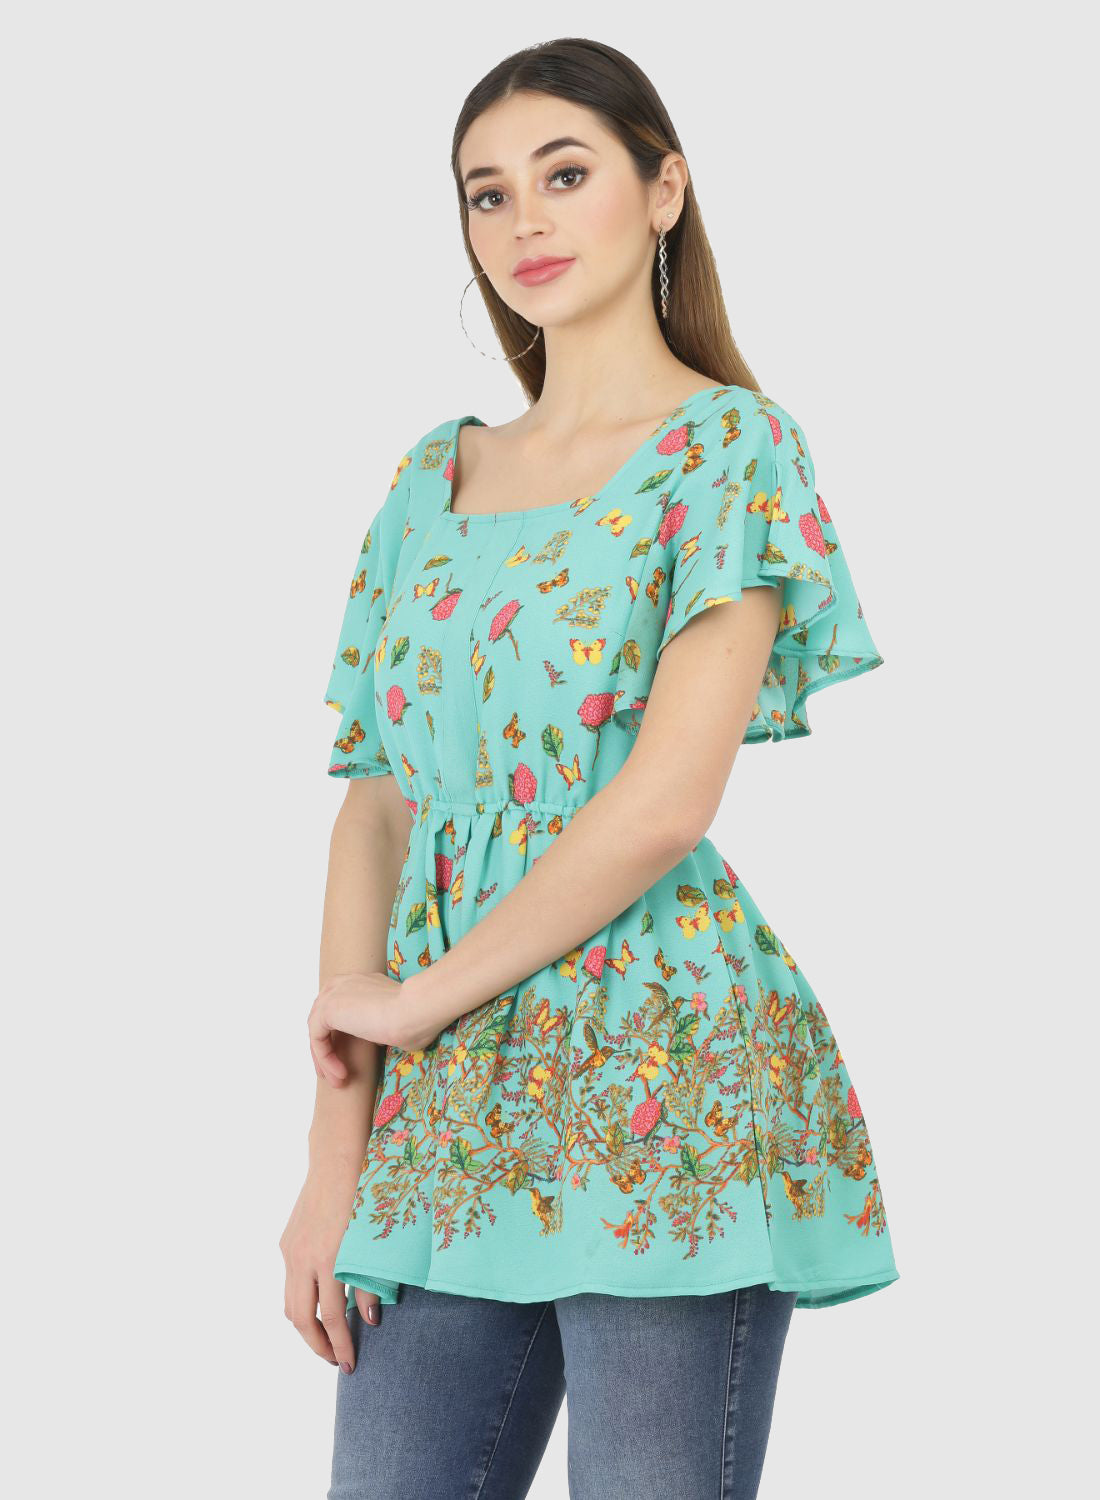 Women Top Printed Regular Fit and Flare